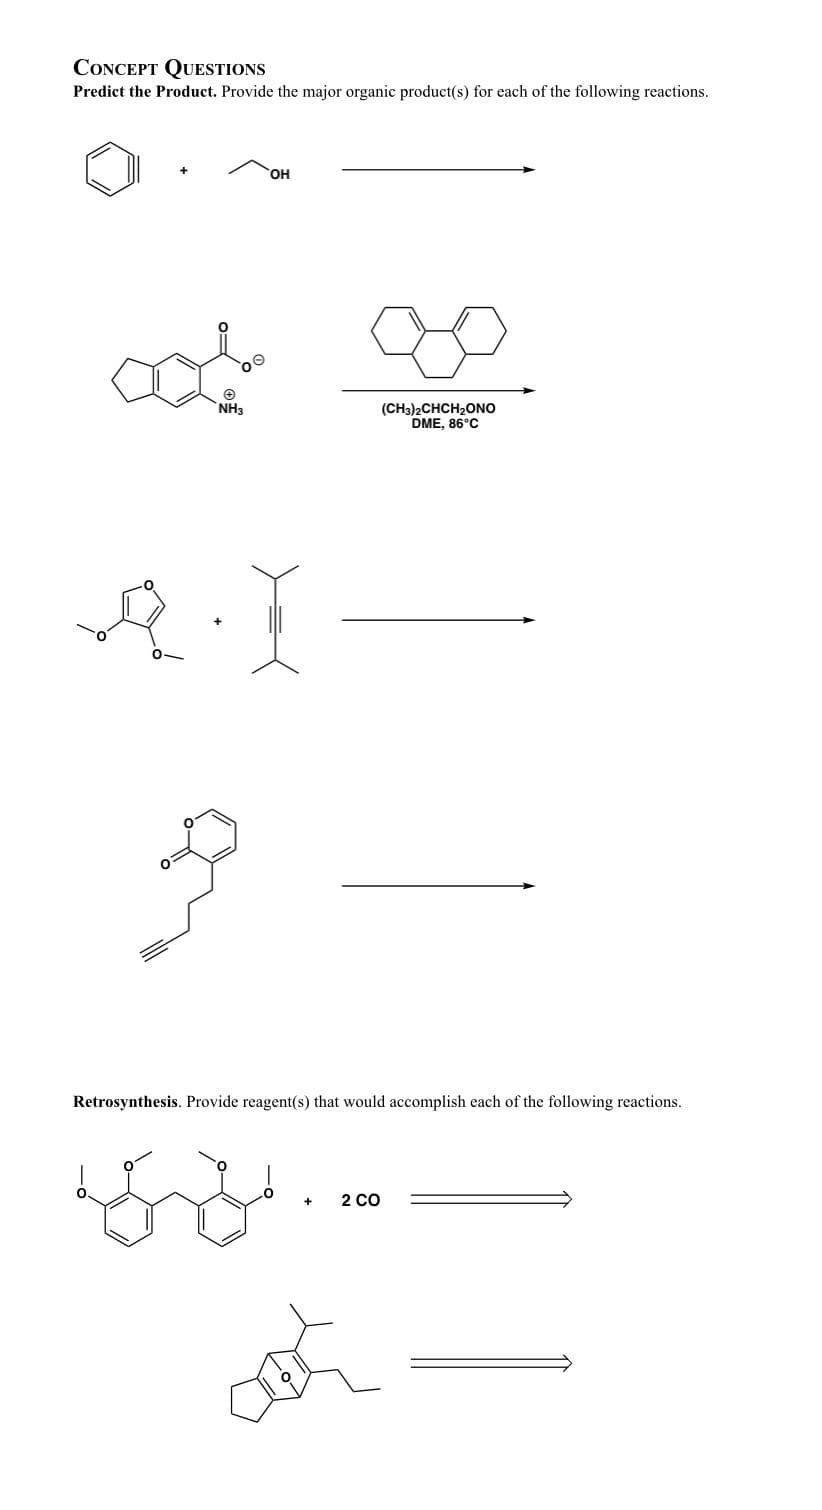 CONCEPT QUESTIONS
Predict the Product. Provide the major organic product(s) for each of the following reactions.
HO,
NH3
(CH3)2CHCH2ONO
DME, 86°C
Retrosynthesis. Provide reagent(s) that would accomplish each of the following reactions.
2 co
